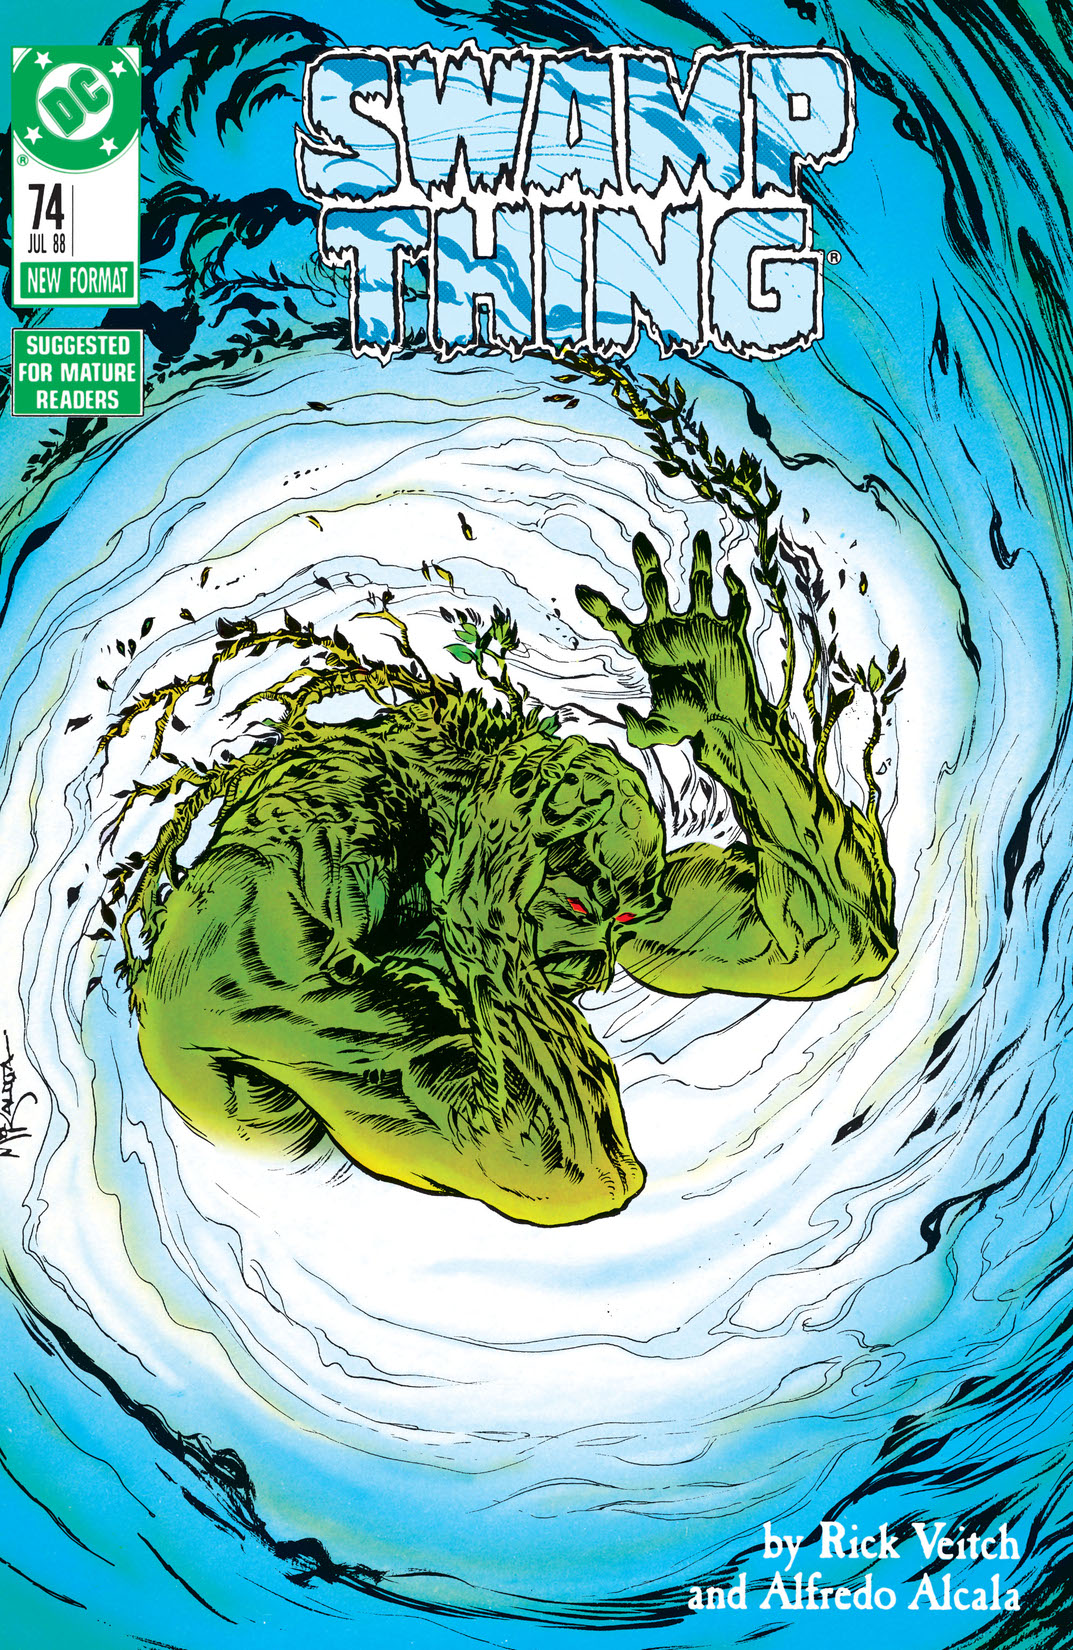 Swamp Thing (1985-1996) #74 preview images